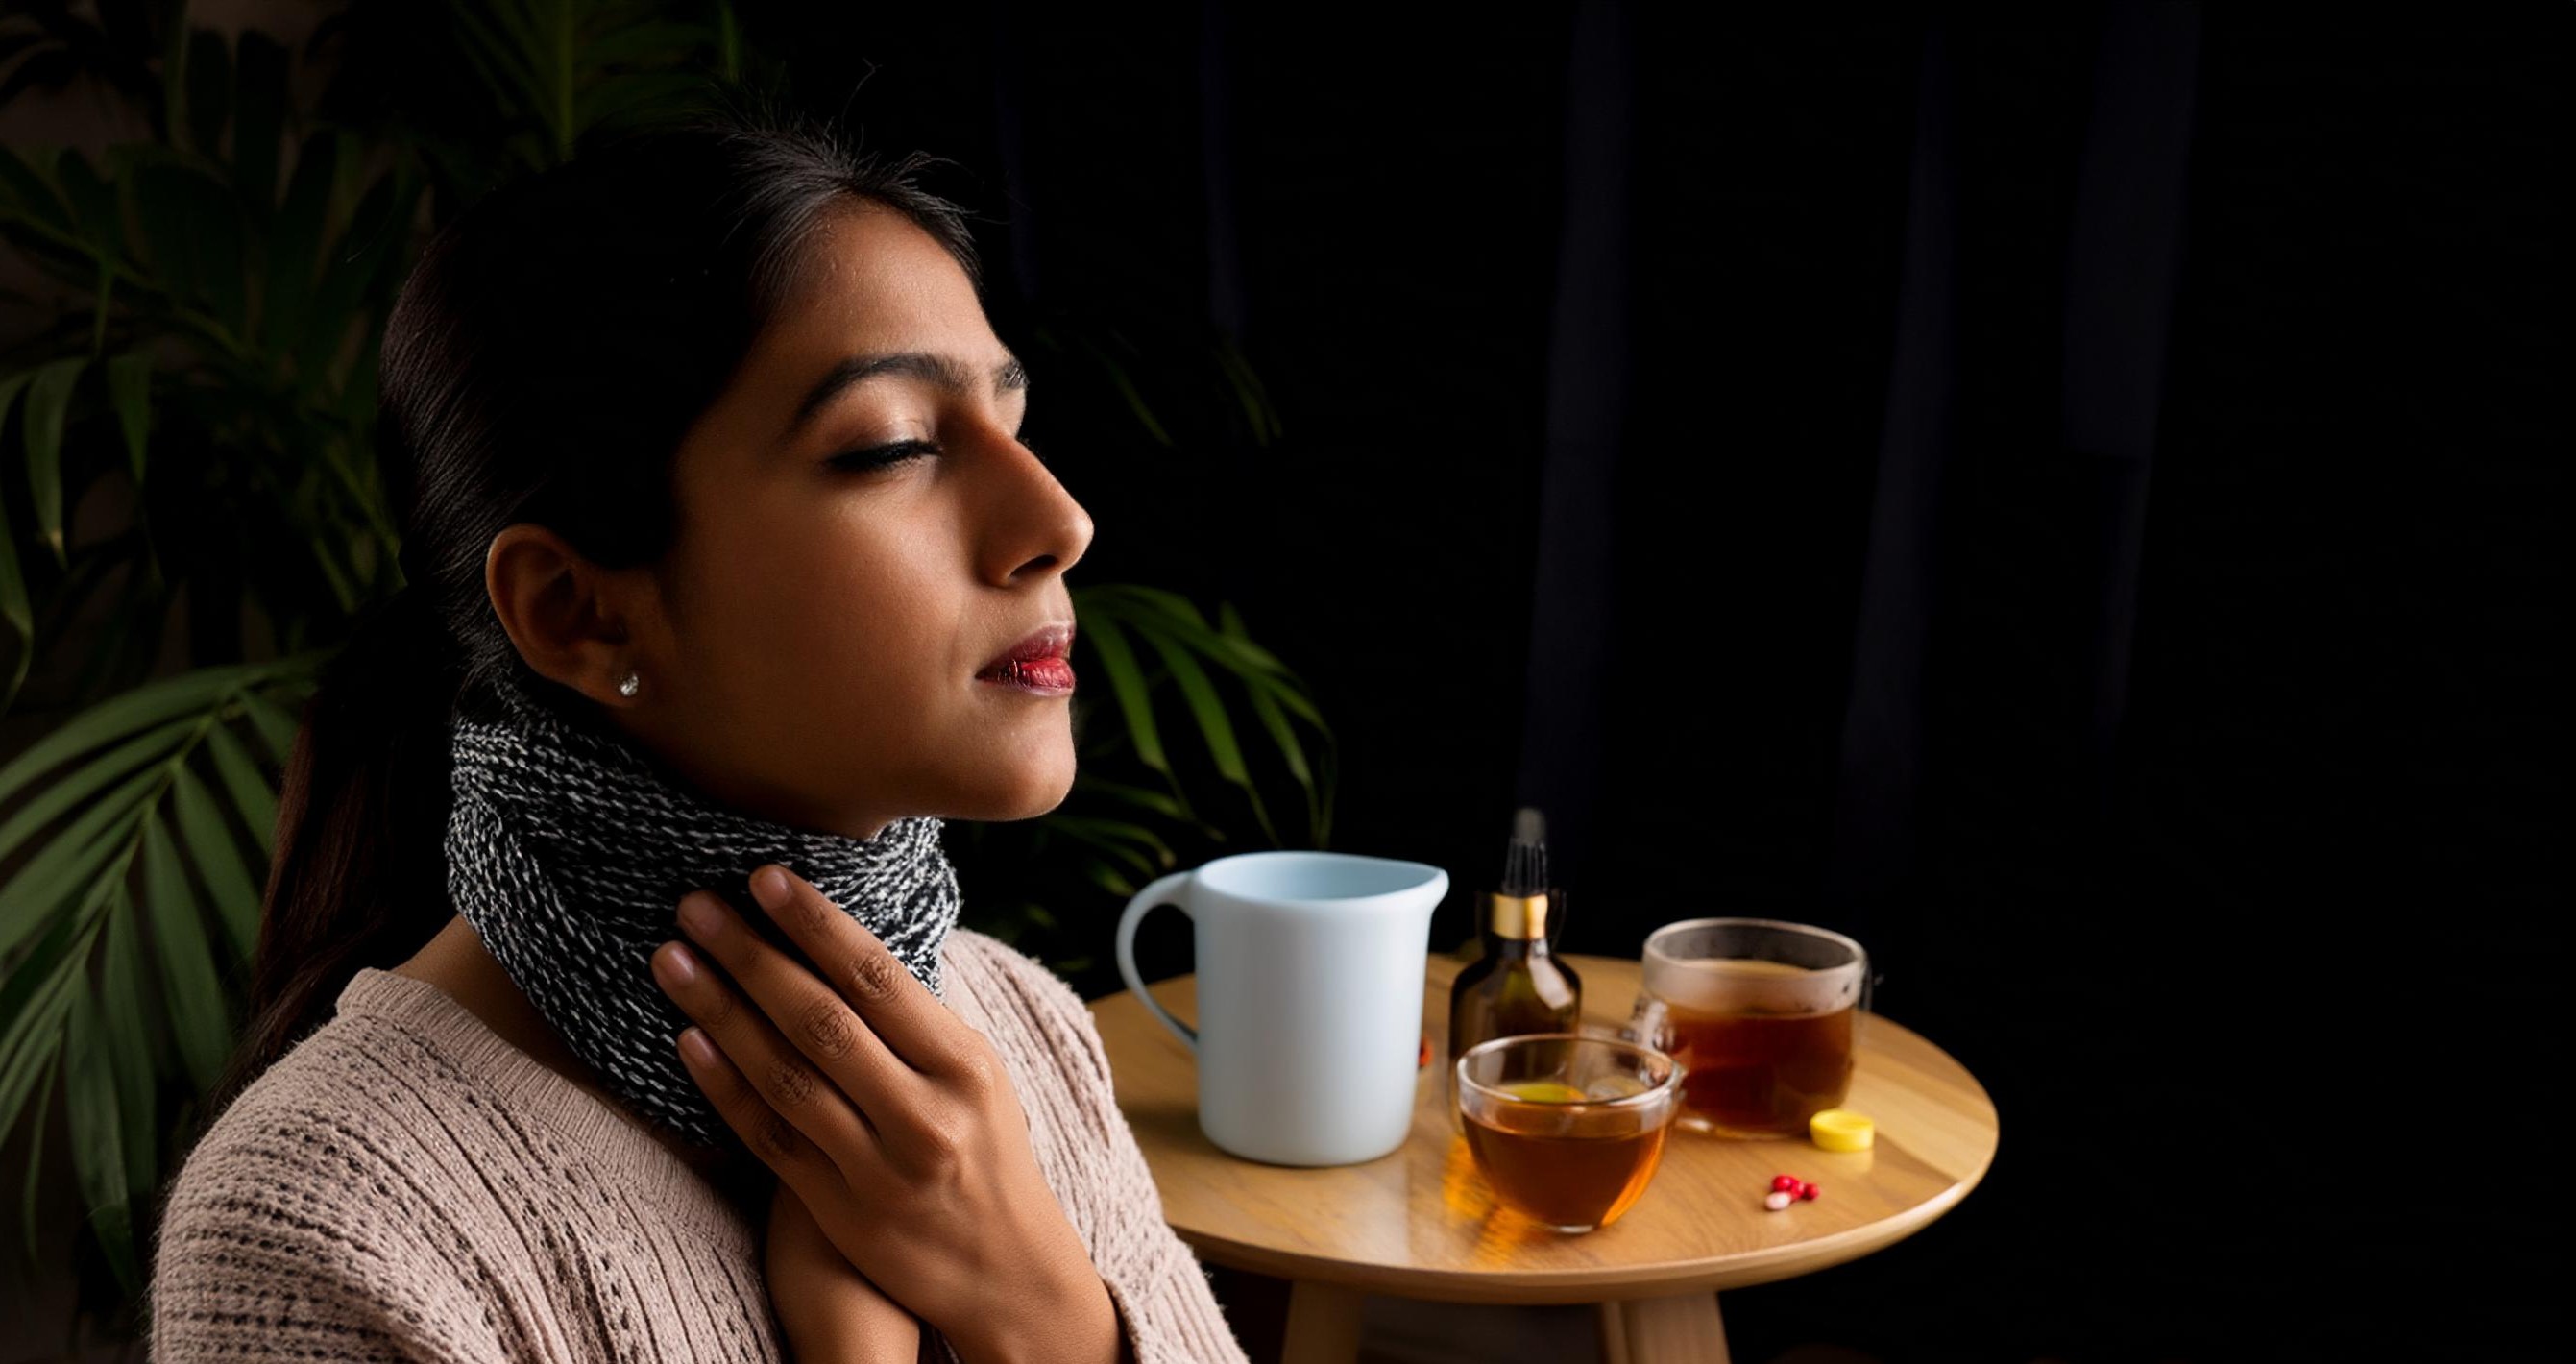 Sore throat: Symptoms, Causes And Management 